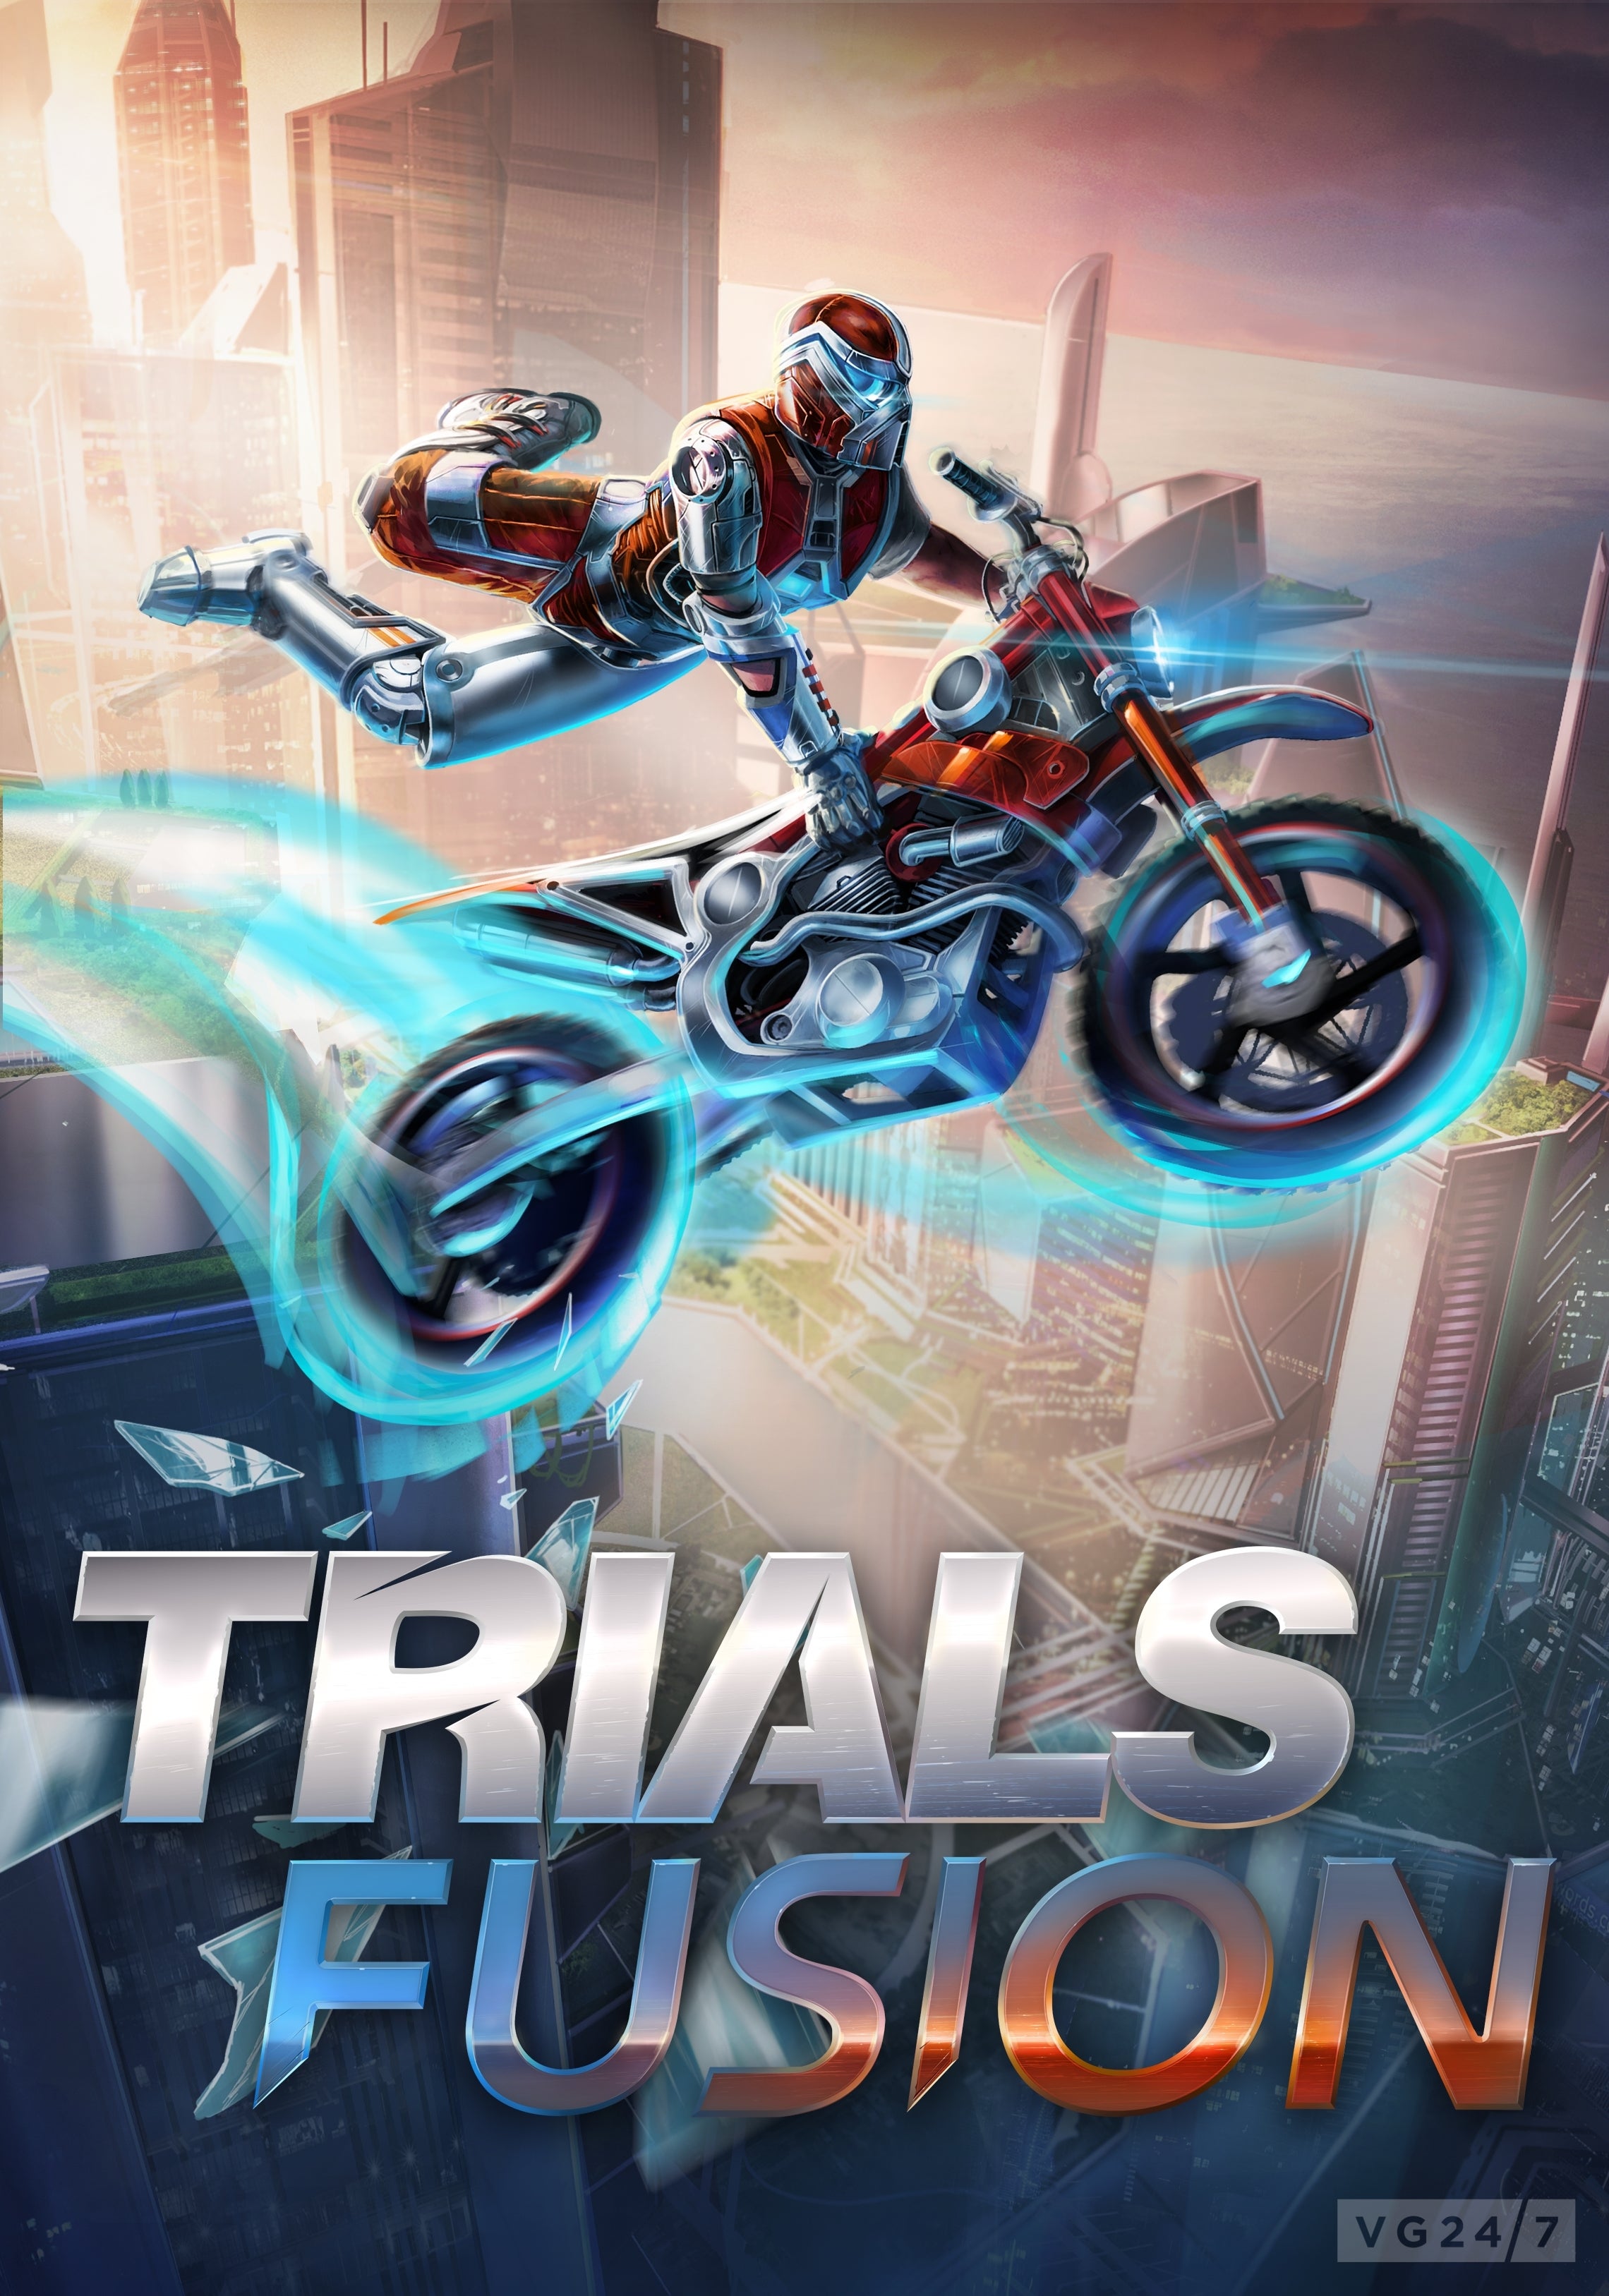 Image for Trials Fusion: PS4 runs at 1080p, Xbox One at 900p after day one patch, all platforms at 60FPS